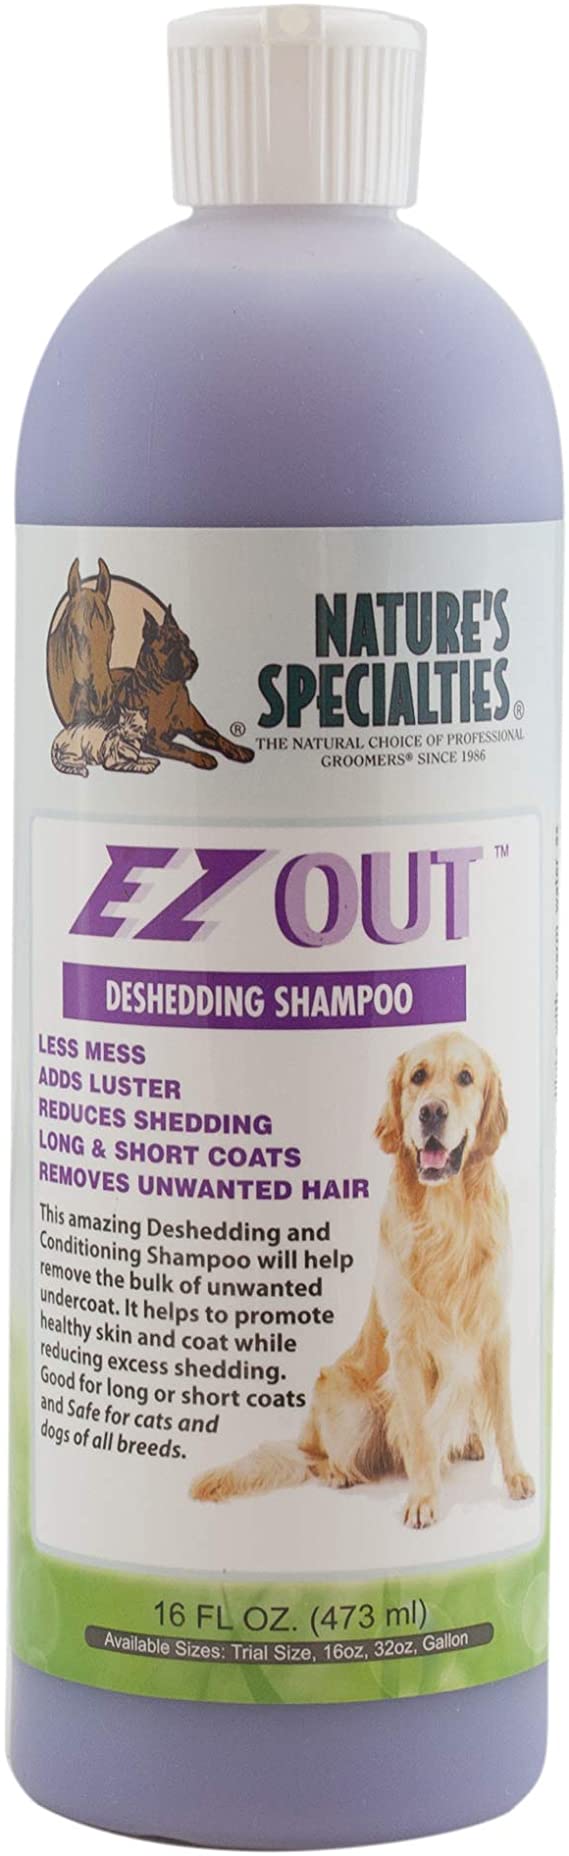 Nature's Specialties EZ Out Deshedding Shampoo for Dogs Cats, Non-Toxic Biodegradeable, 2oz